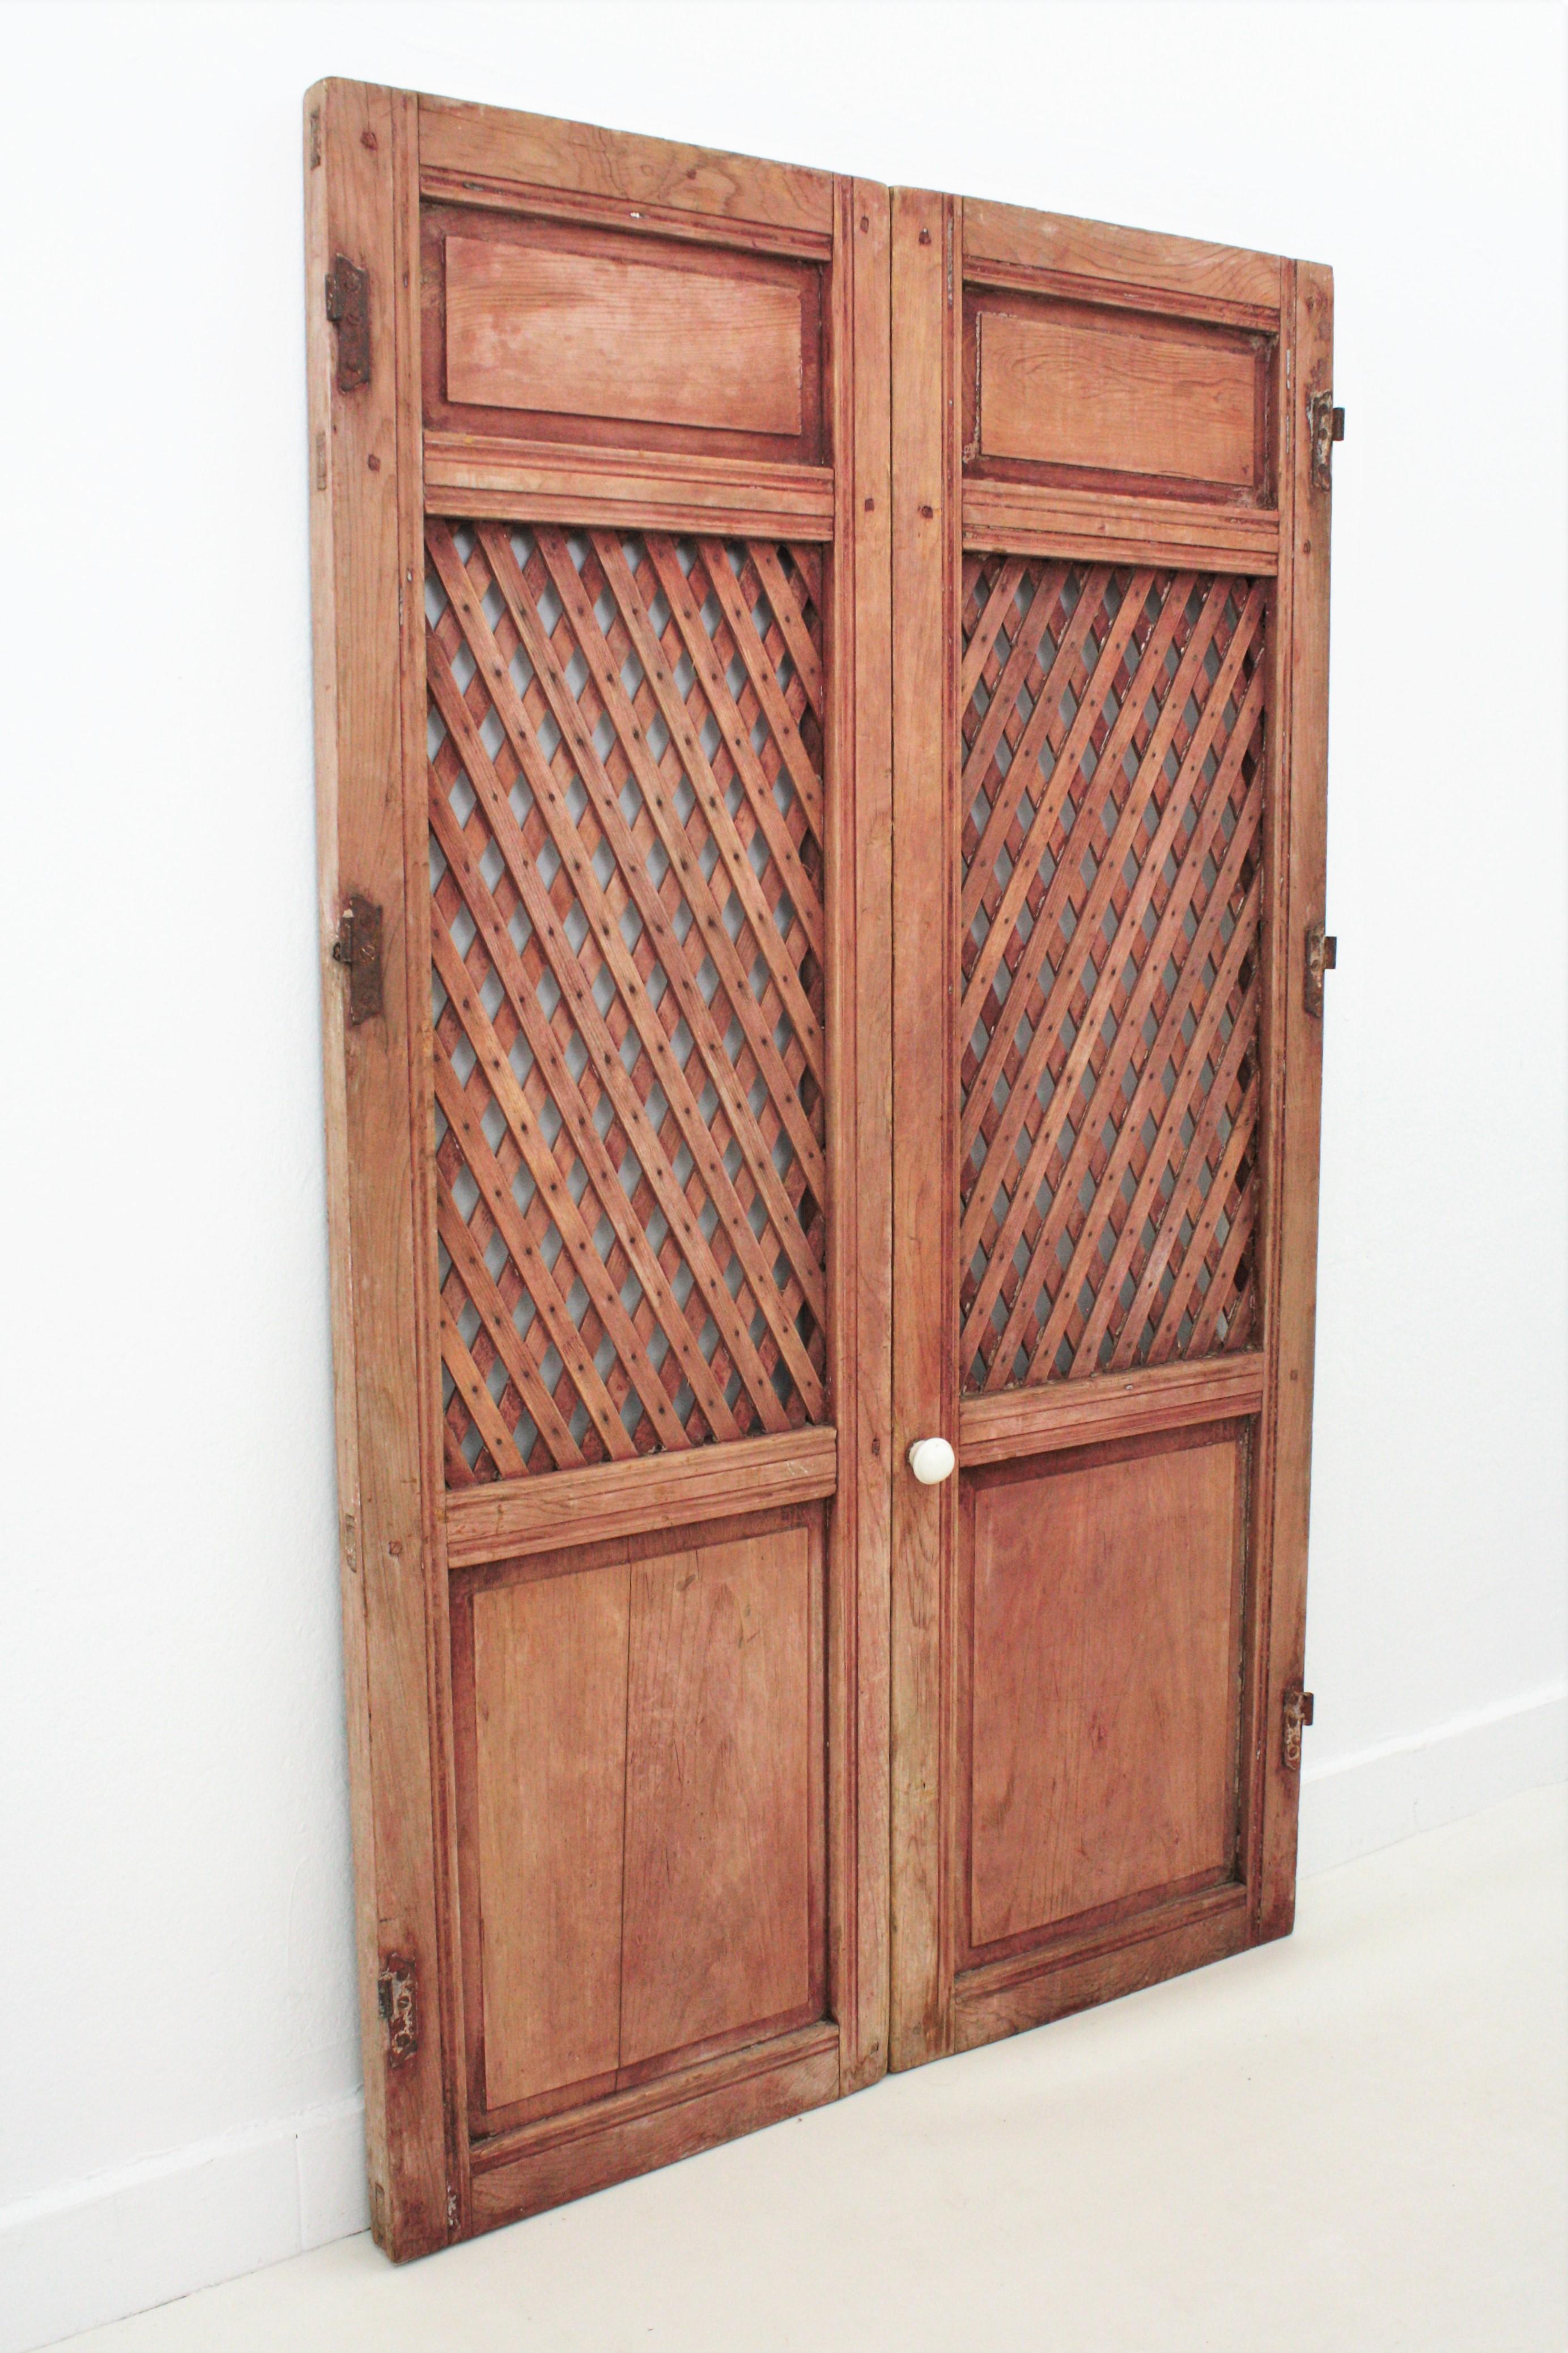 Antique Spanish 19th century cupboard rustic doors with lattice and carved panels, early 19th century.
These antique doors come from a cottage house in Galicia at the North coast of Spain. They were part of an antique lattice food